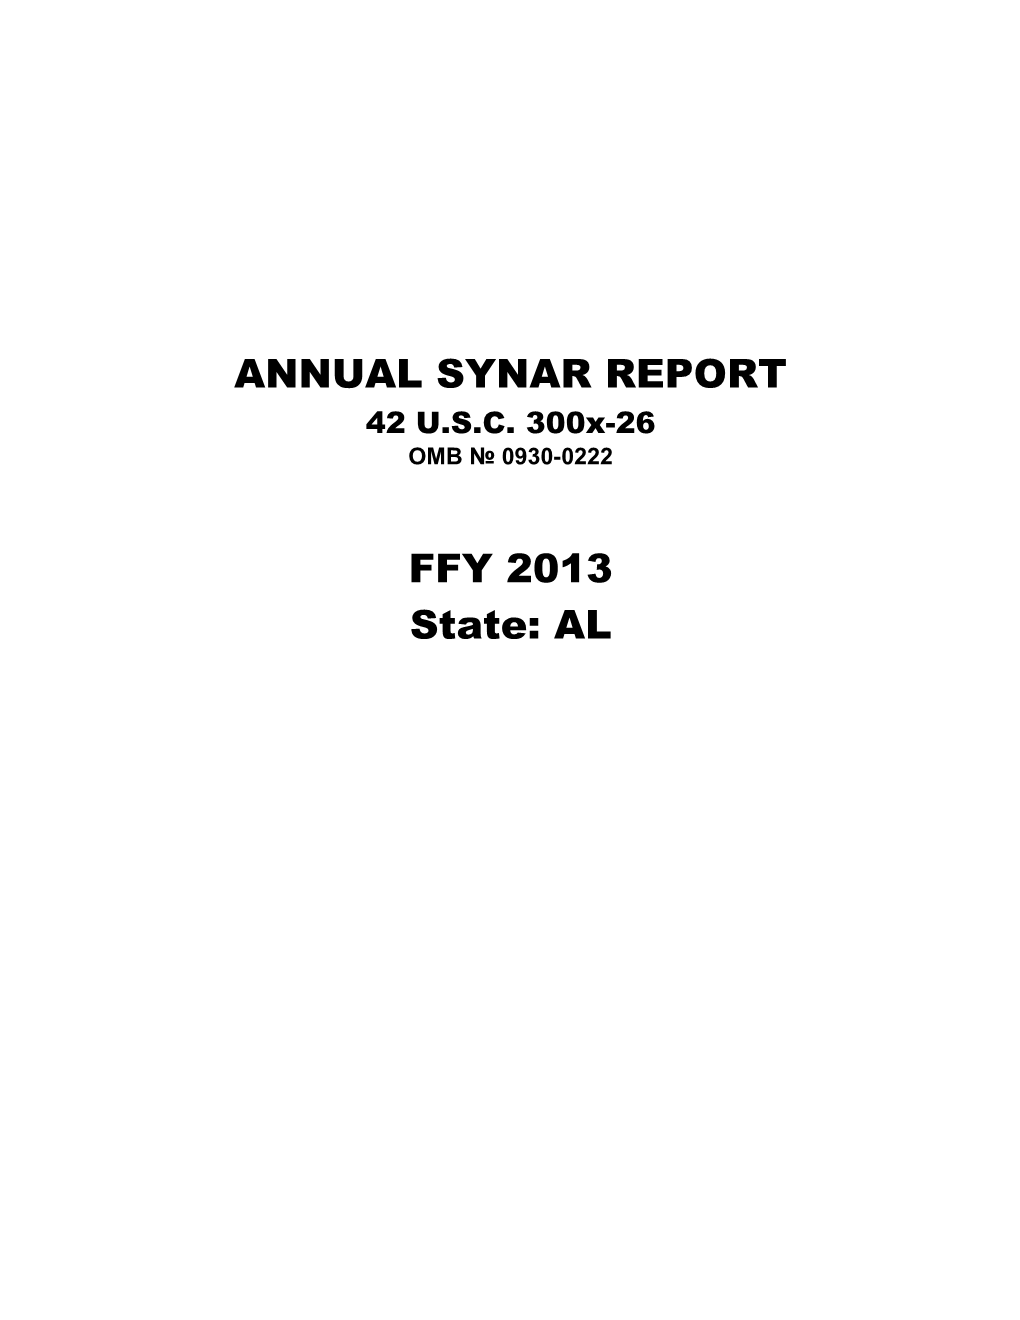 Annual Synar Report s1